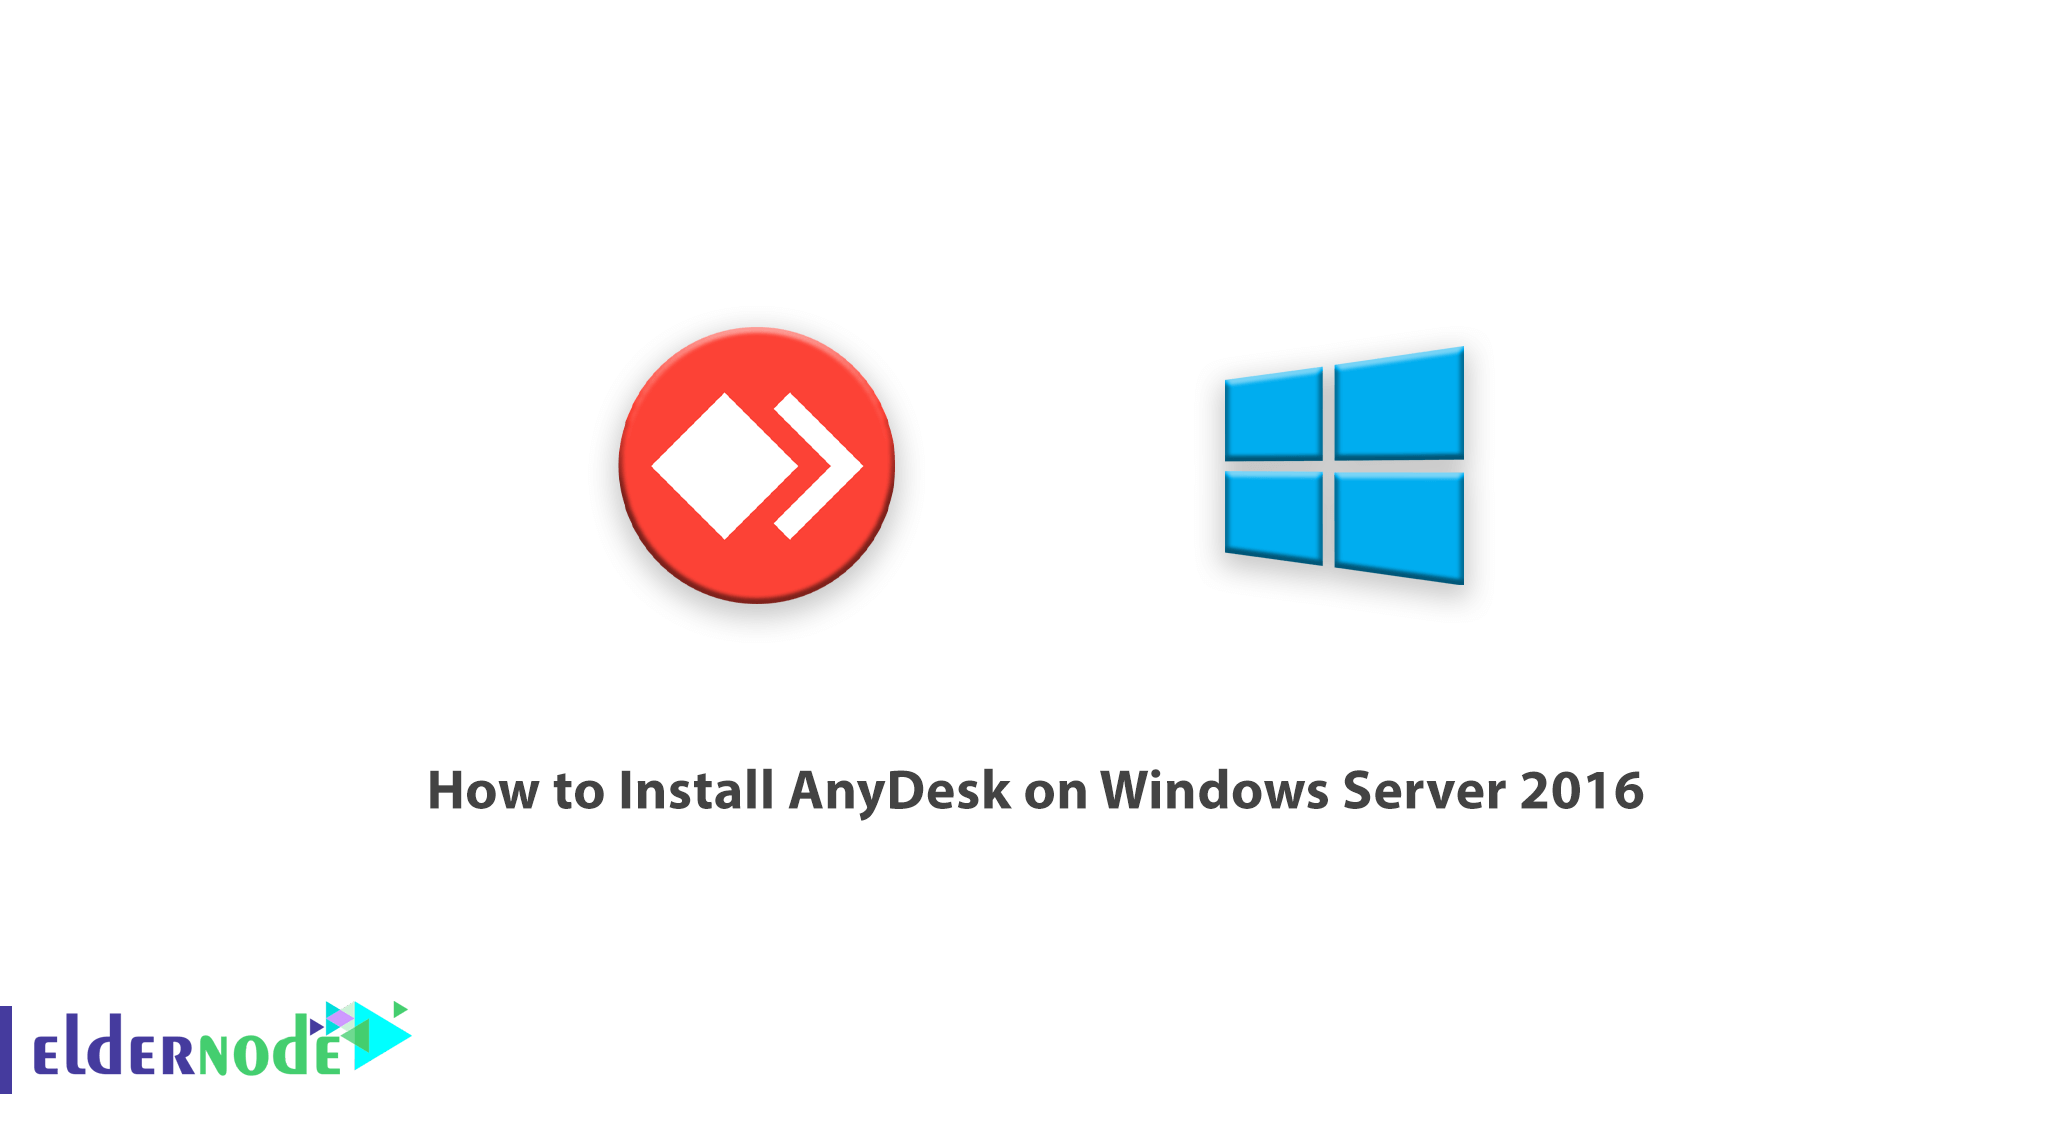 How to Install AnyDesk on Windows Server 2016